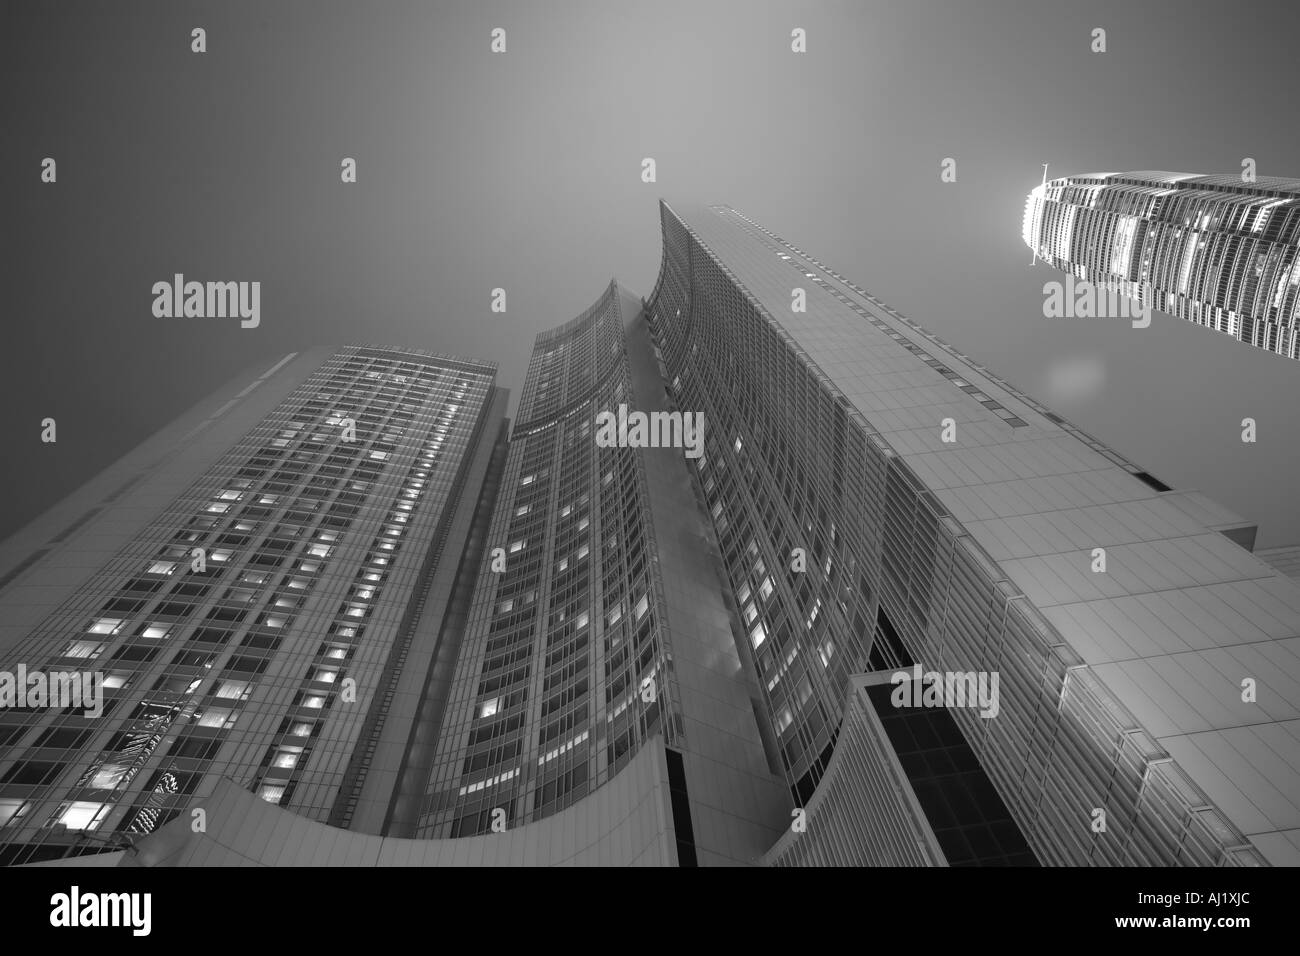 Asia Peoples Republic of China Hong Kong View looking up at modern architecture of Four Seasons Hotel Stock Photo